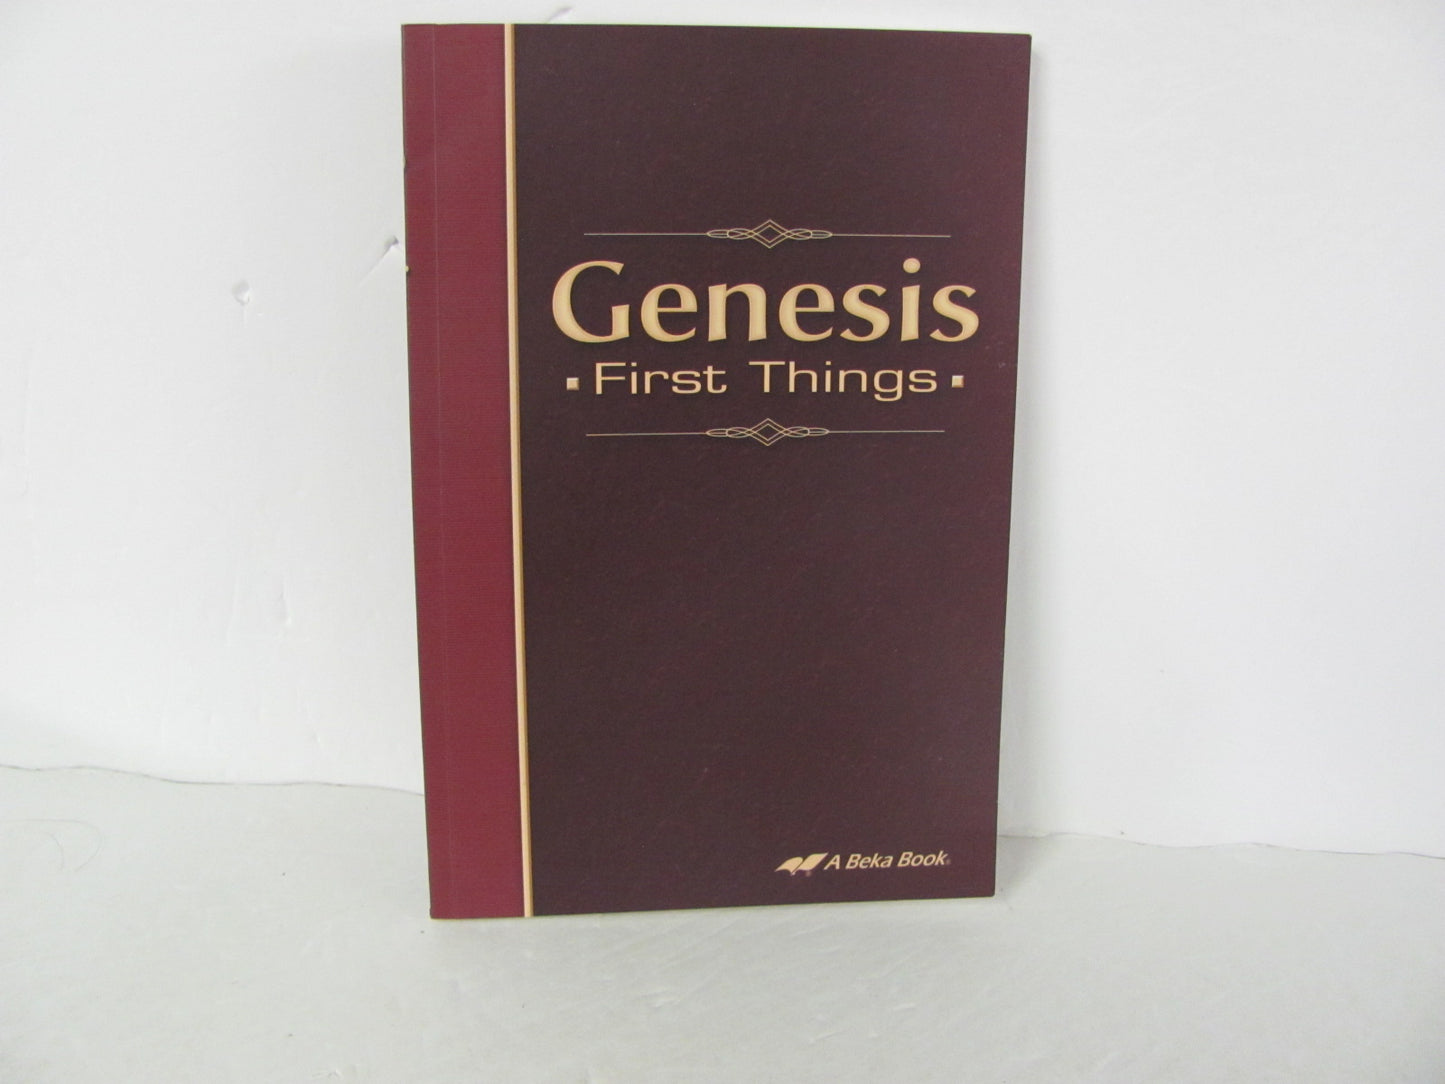 Genesis Abeka Student Book Pre-Owned 12th Grade Bible Textbooks